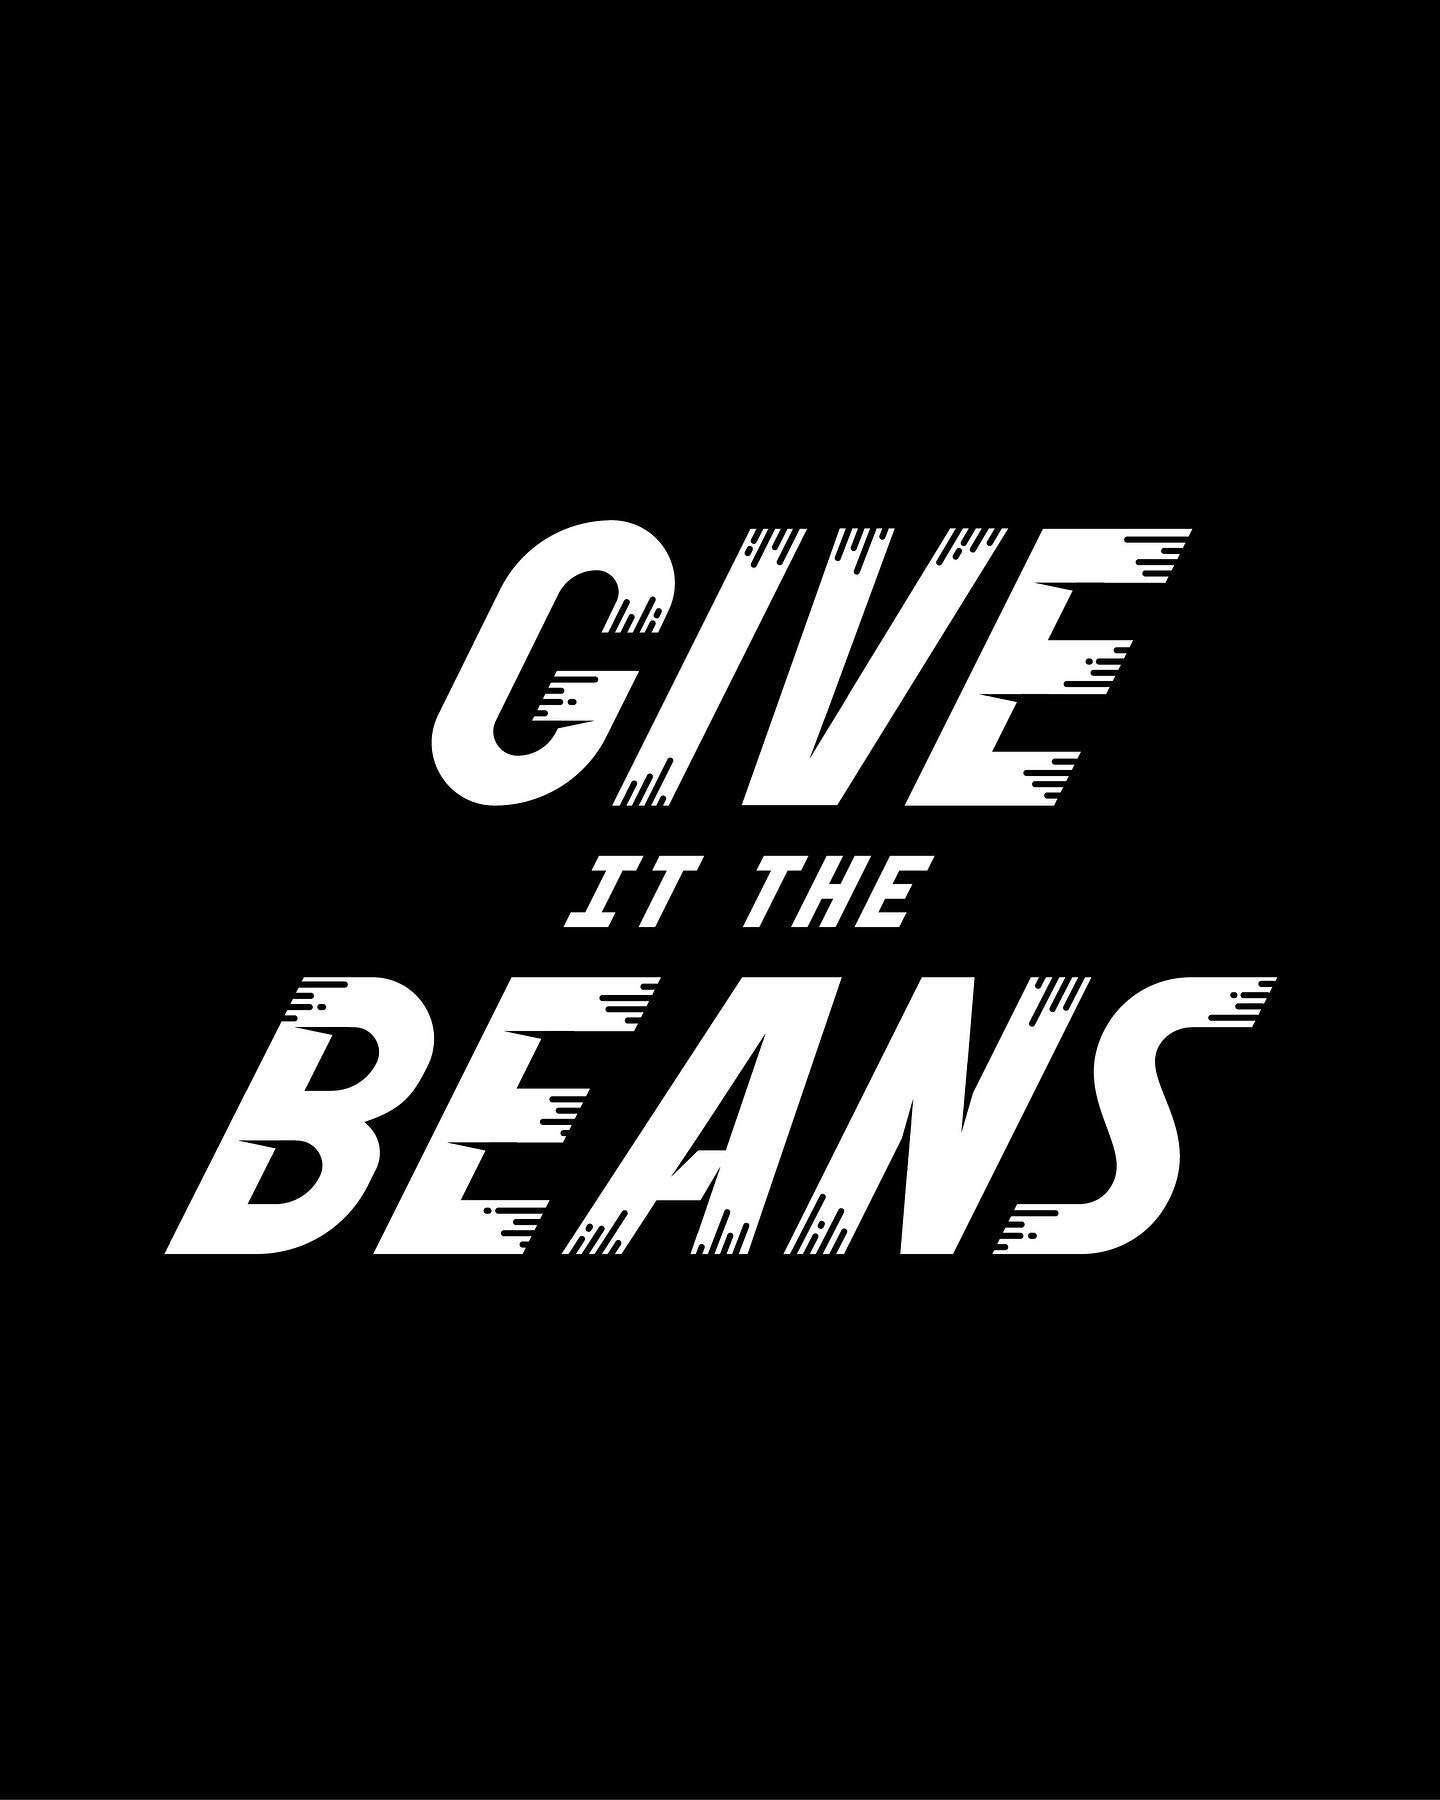 Sometimes you must put the pedal to the metal and give it everything you got. So we&rsquo;re making &ldquo;Give it the Beans&rdquo; stickers for those moments. 
#justforfun #revit #motorcycles #cars #boats #offroading #typography #lettering #design #